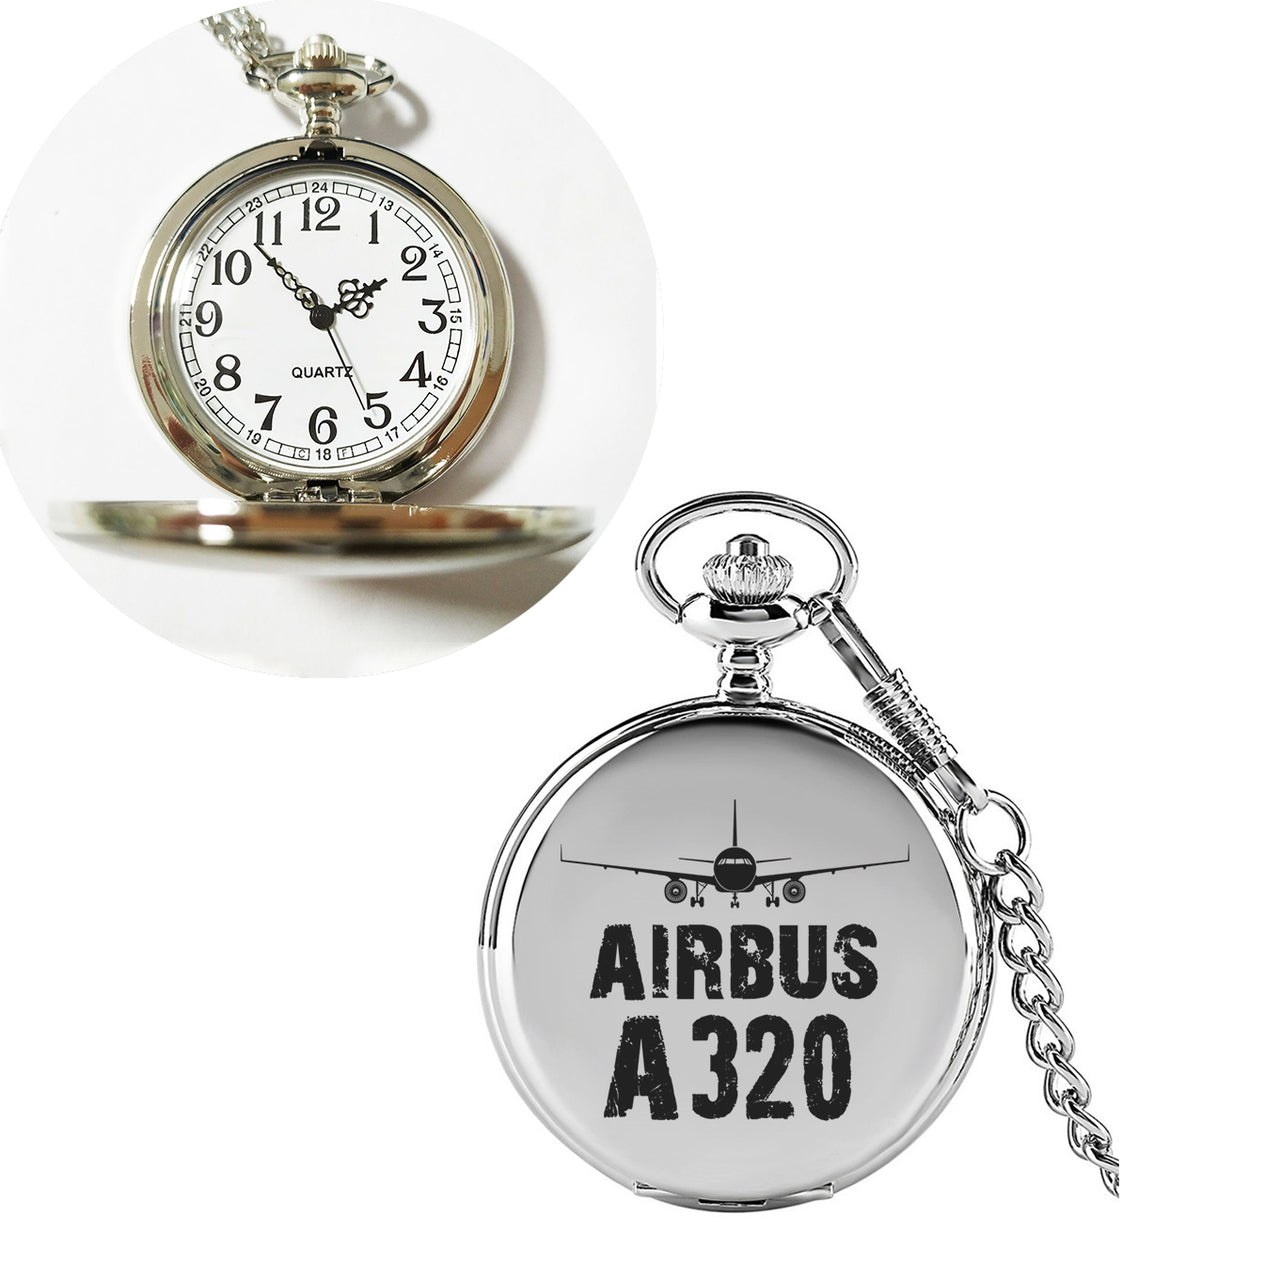 Airbus A320 & Plane Designed Pocket Watches